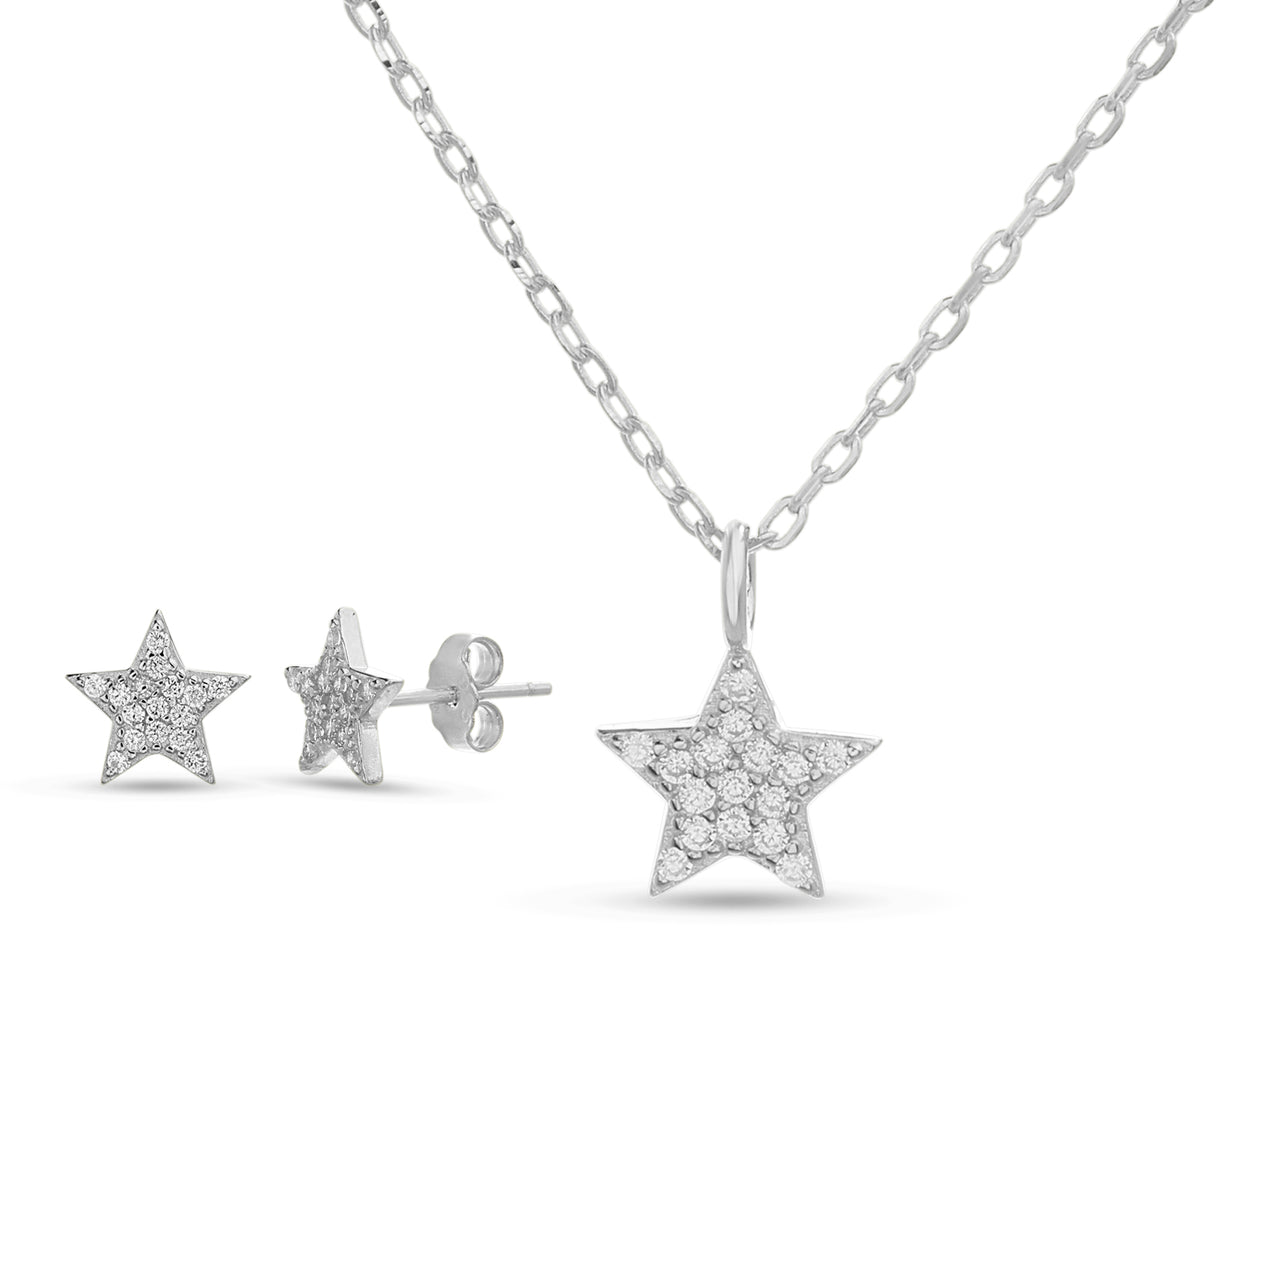 Lesa Michele Rhodium Plated Stelring Silver Star Cubic Zirconia Station Necklace and Matching Stud Earring Set